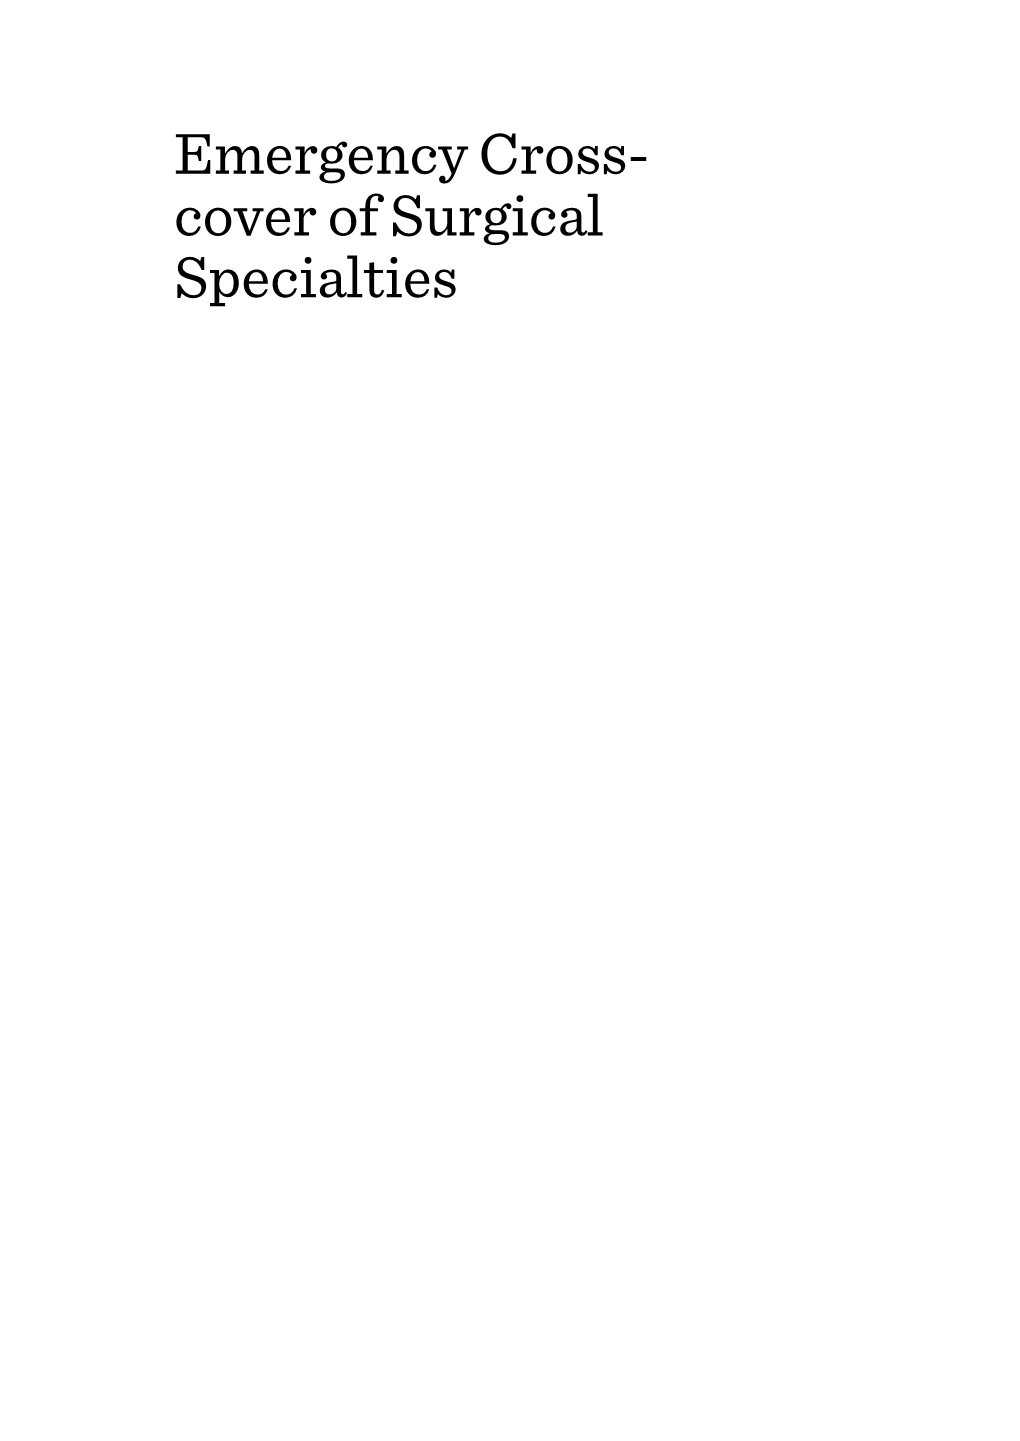 Emergency Cross- Cover of Surgical Specialties